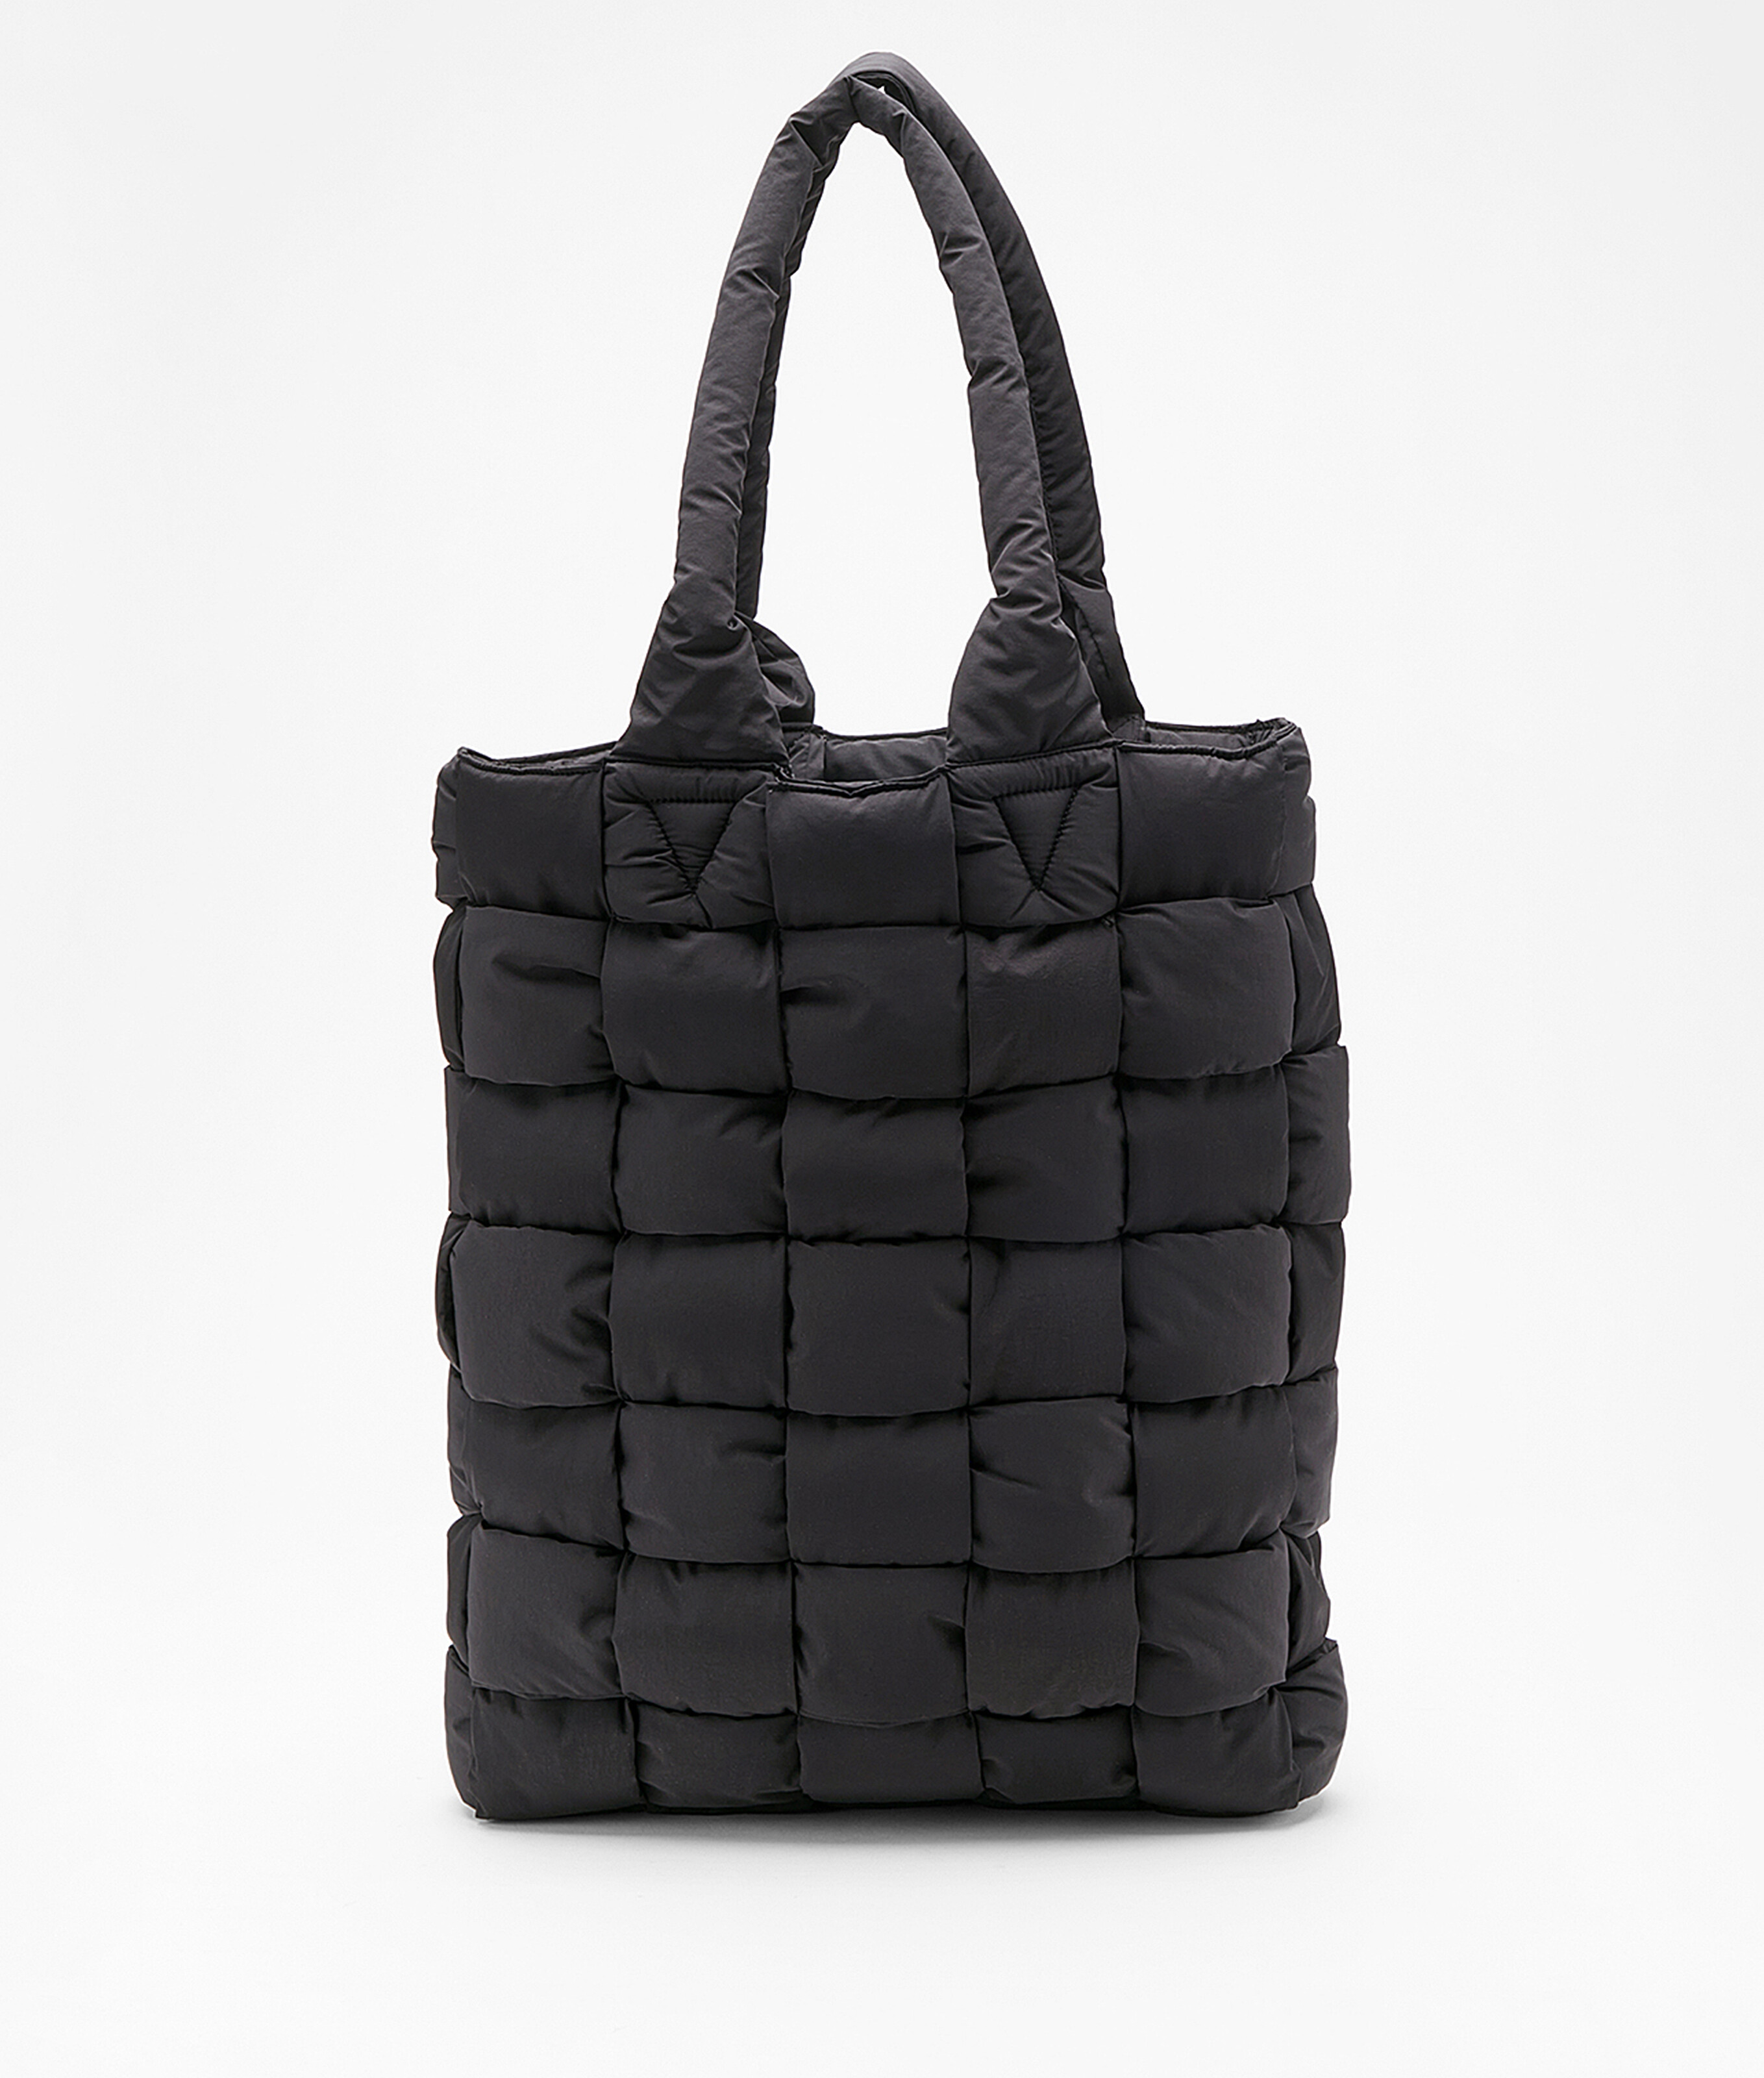 padded tote